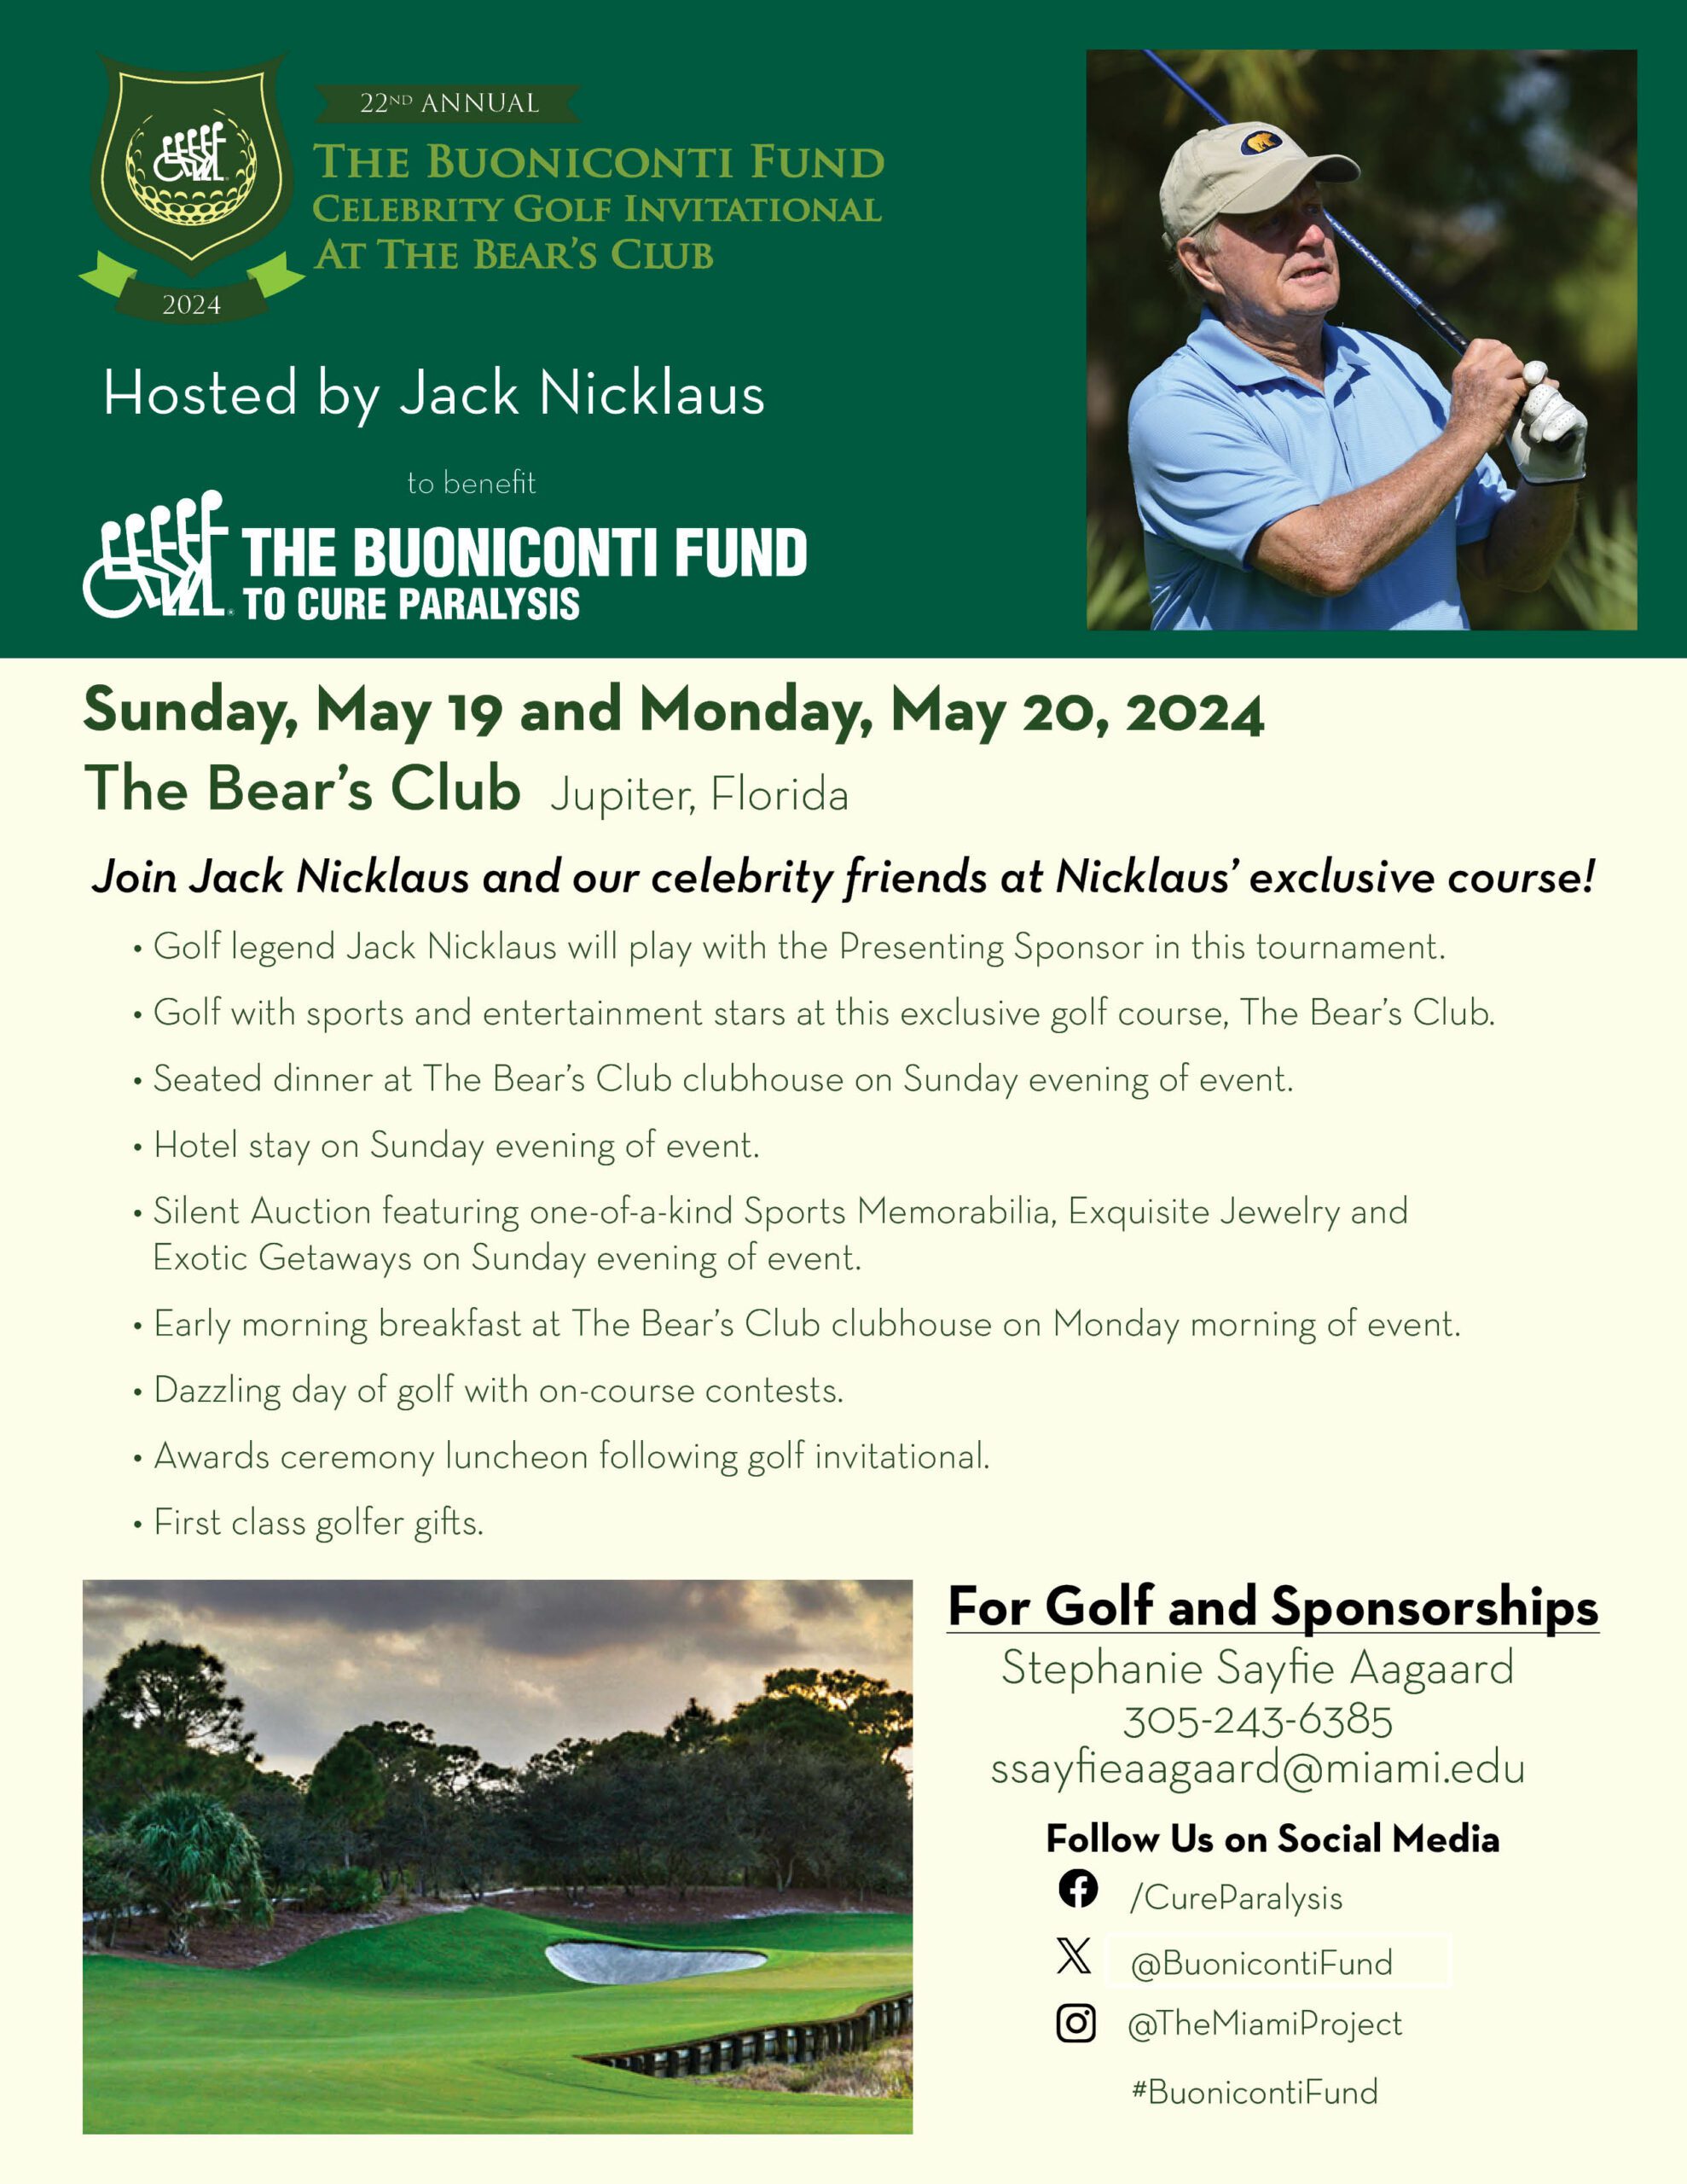 22nd Annual Buoniconti Fund Celebrity Golf Invitational with Jack Nicklaus